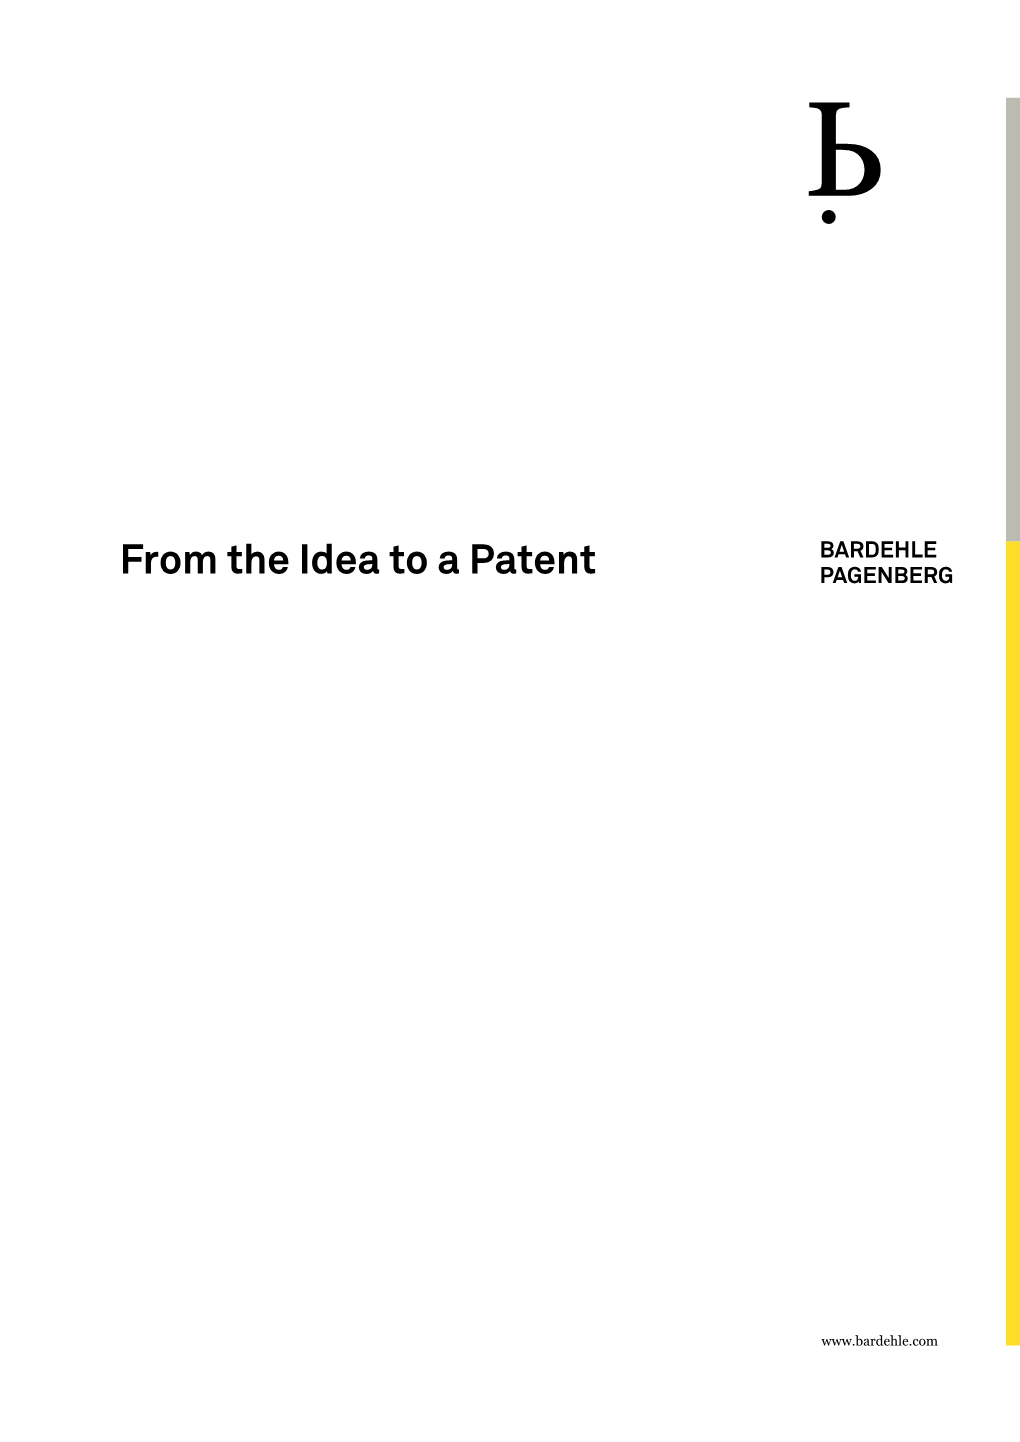 From the Idea to a Patent